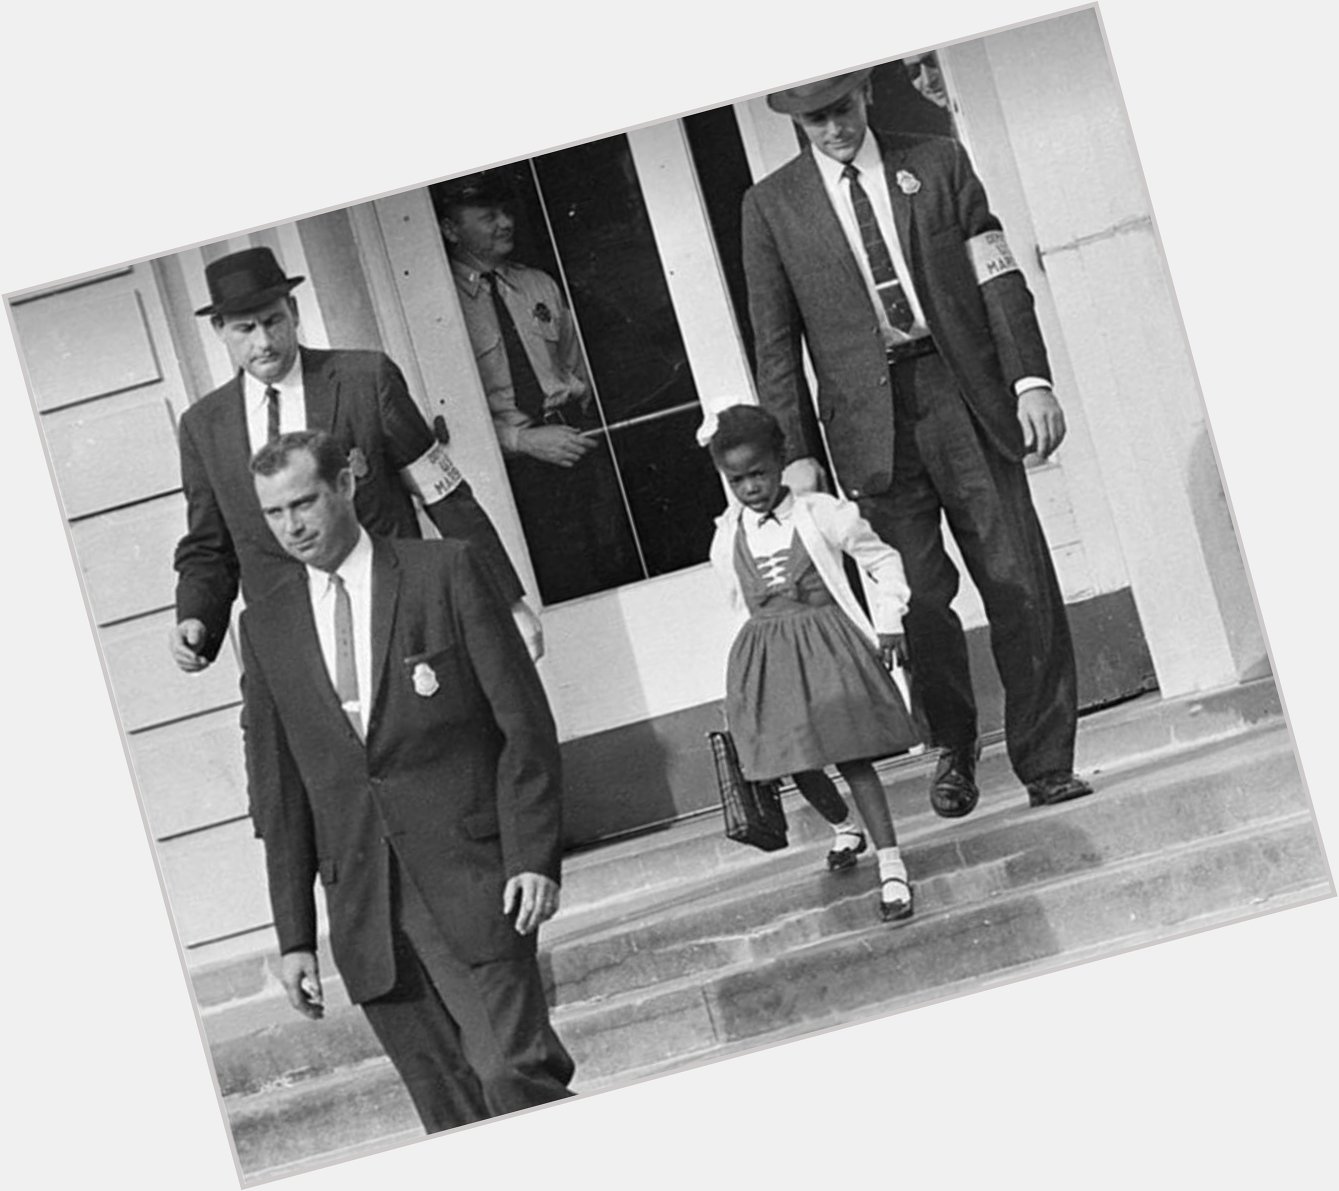 Brave little one building bridges and making a difference. Happy birthday today, Ruby Bridges. 